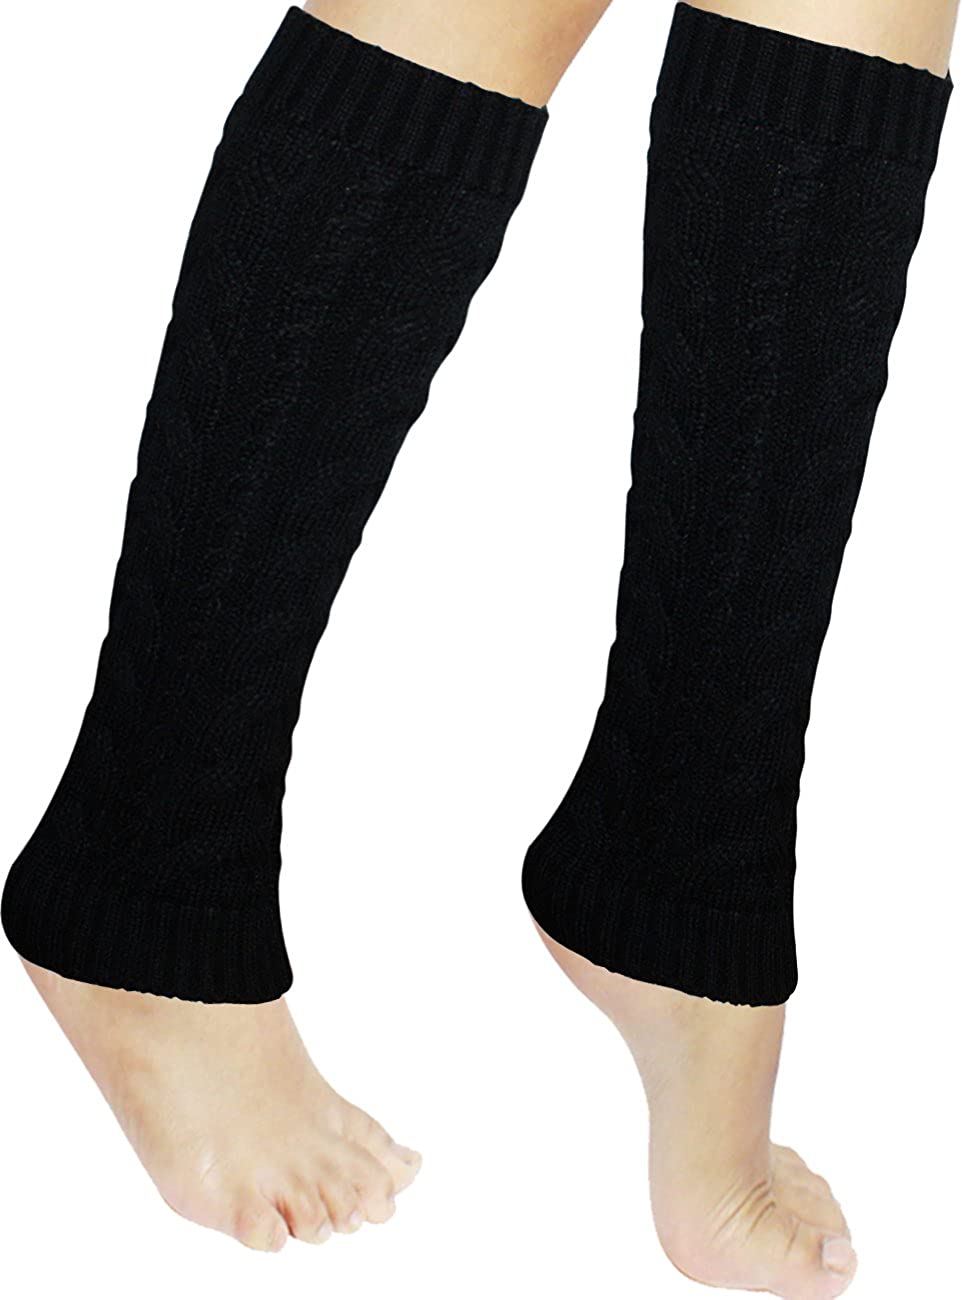 Synthetic Wool Dahlia Women's Leg Warmers & Boot Cuffs Cable Knit